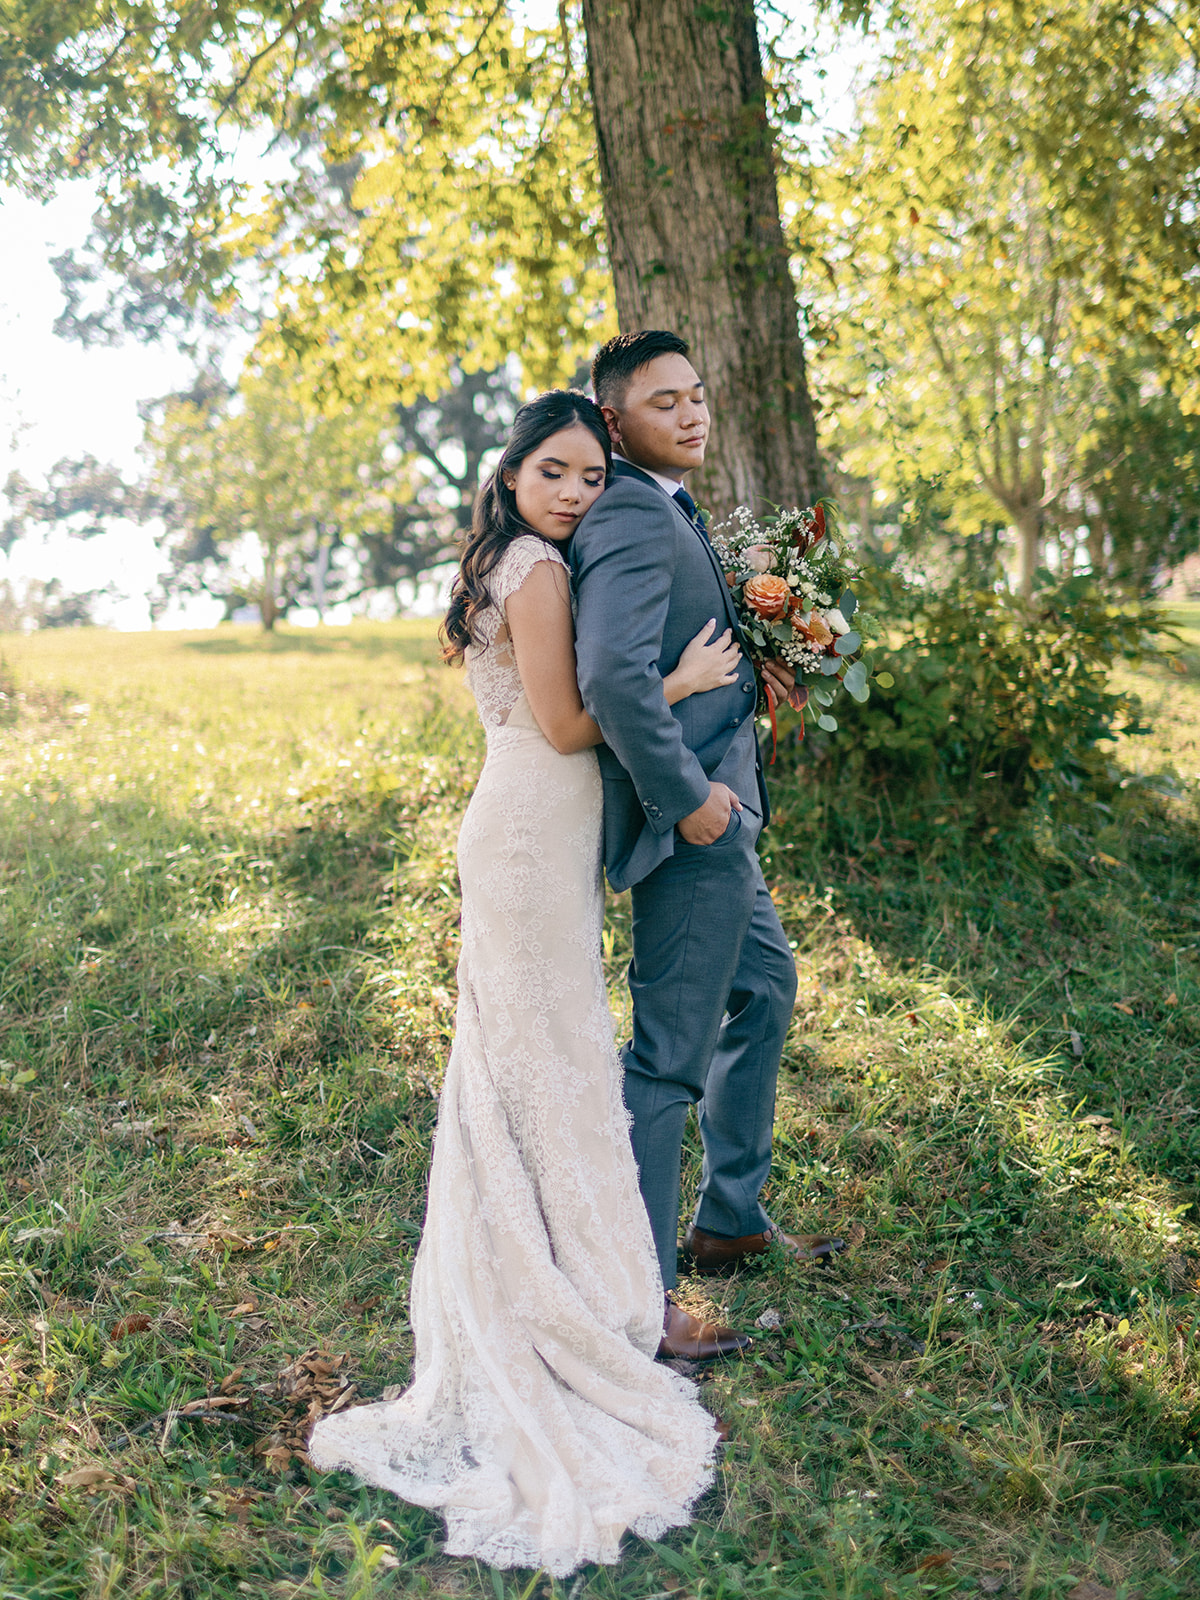 Newlyweds hug and stand under a tree